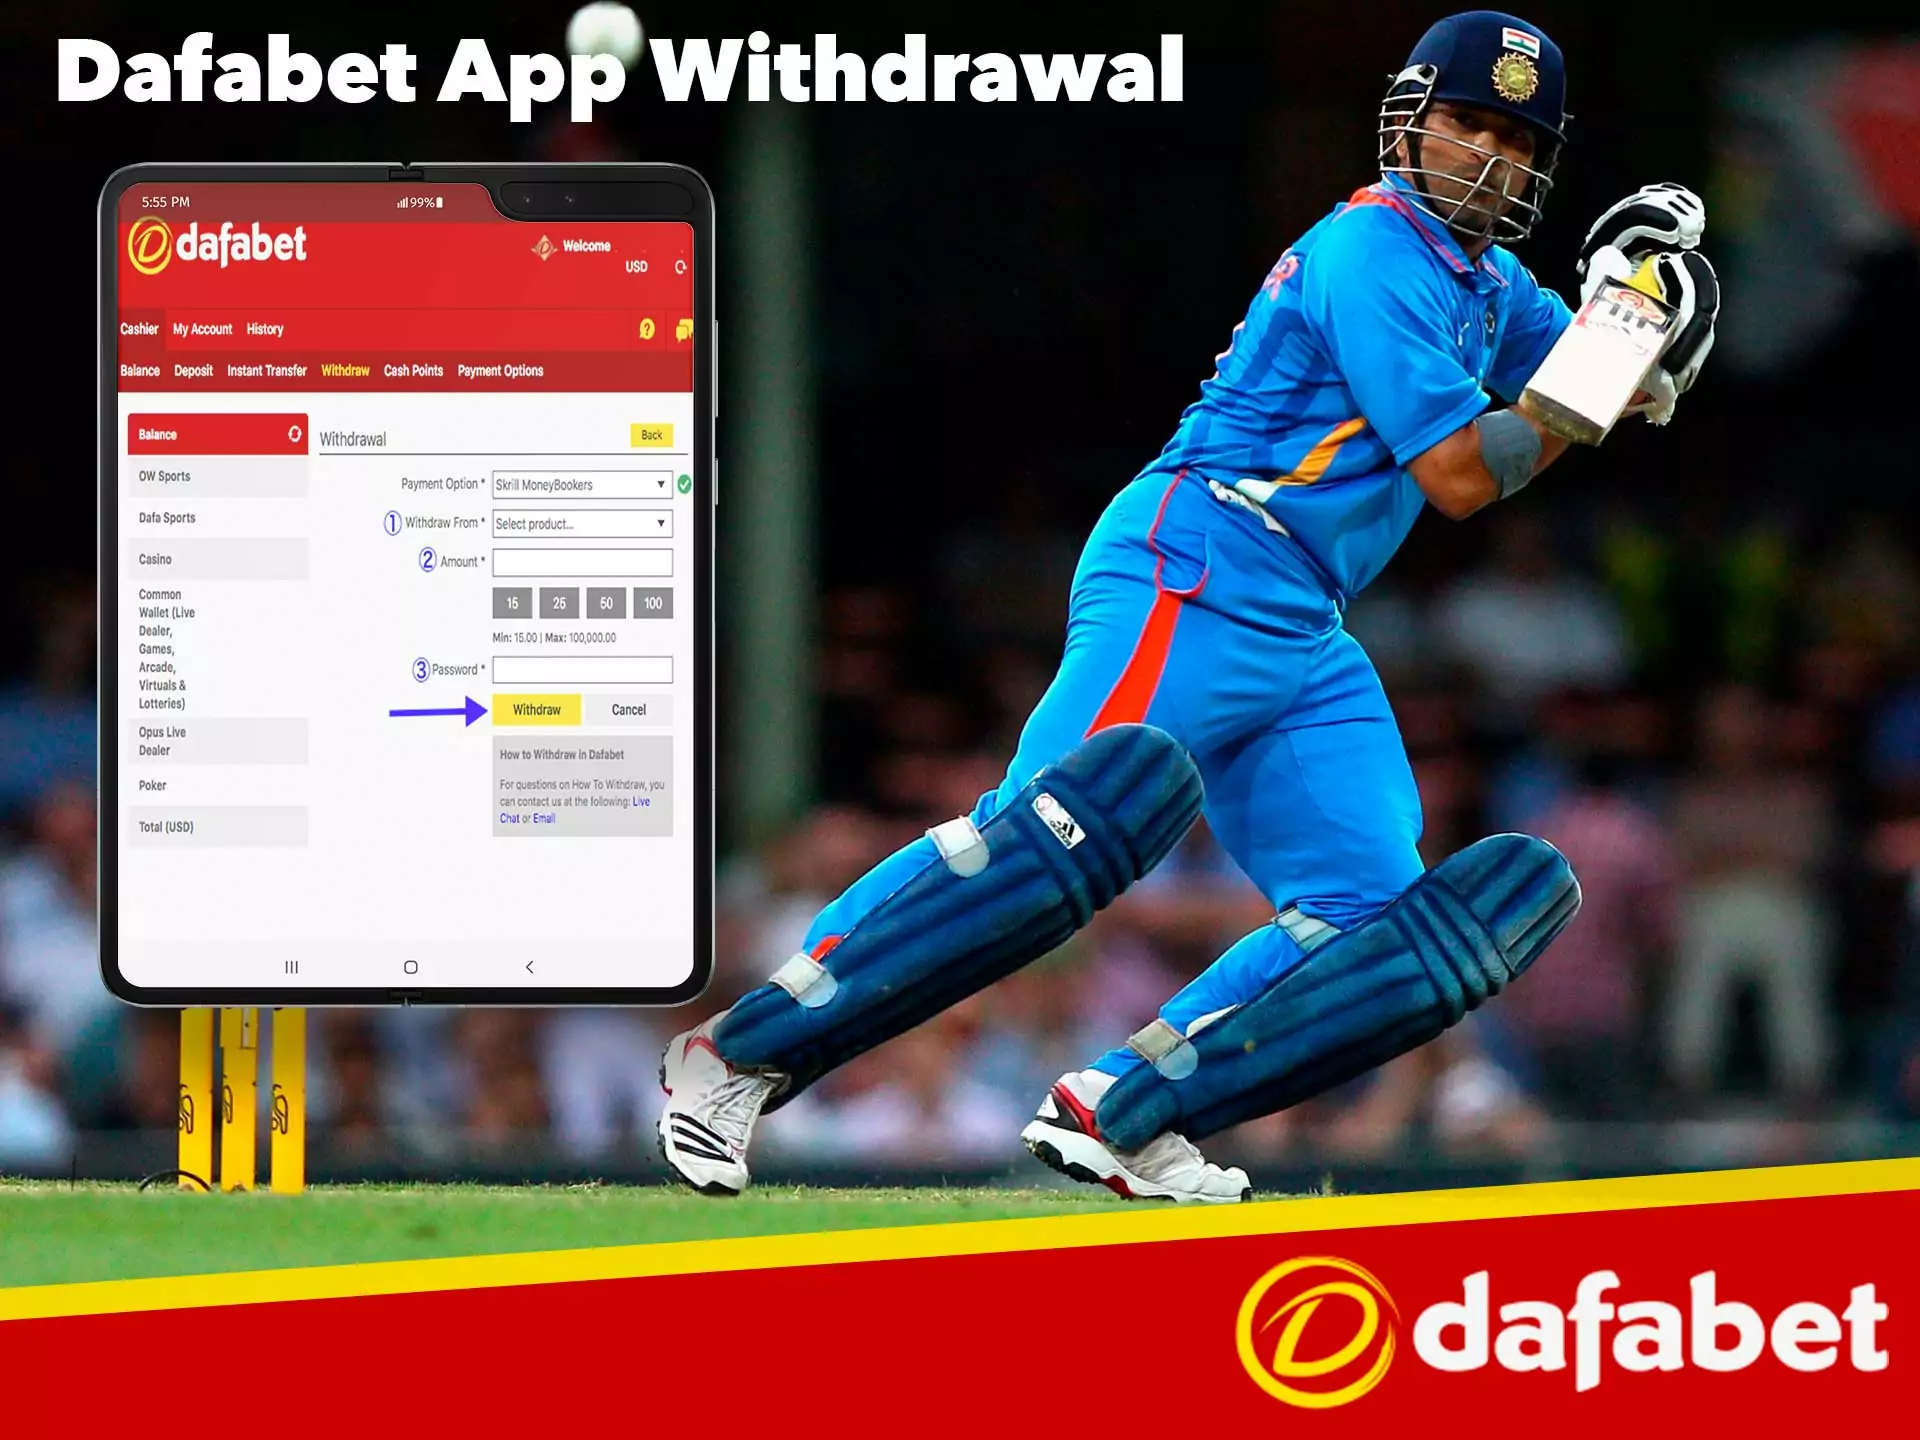 How to receive funds after several successful bets in Dafabet app.